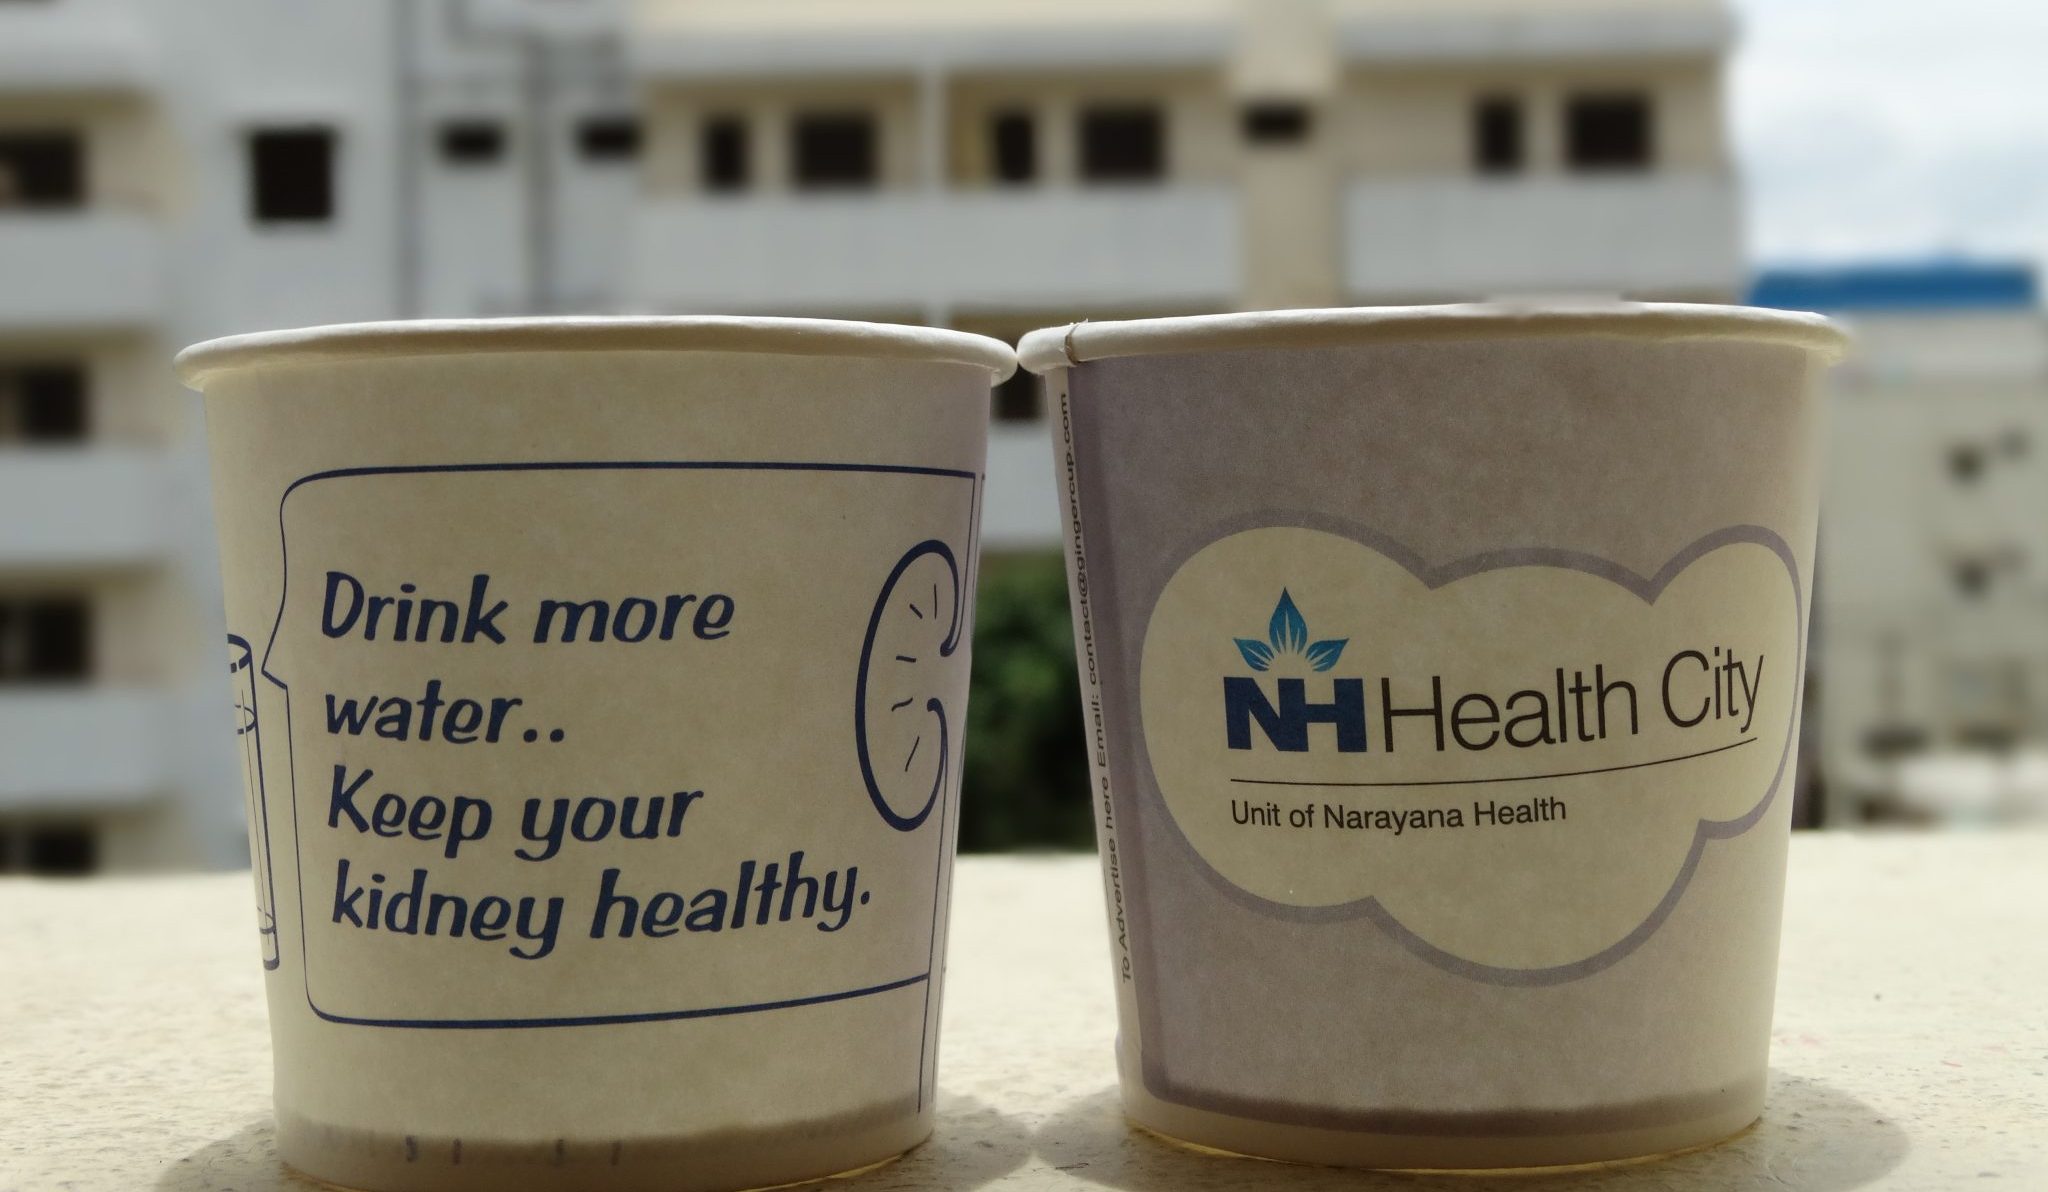 healthcare and hospital marketing creative paper cup ads gingercup